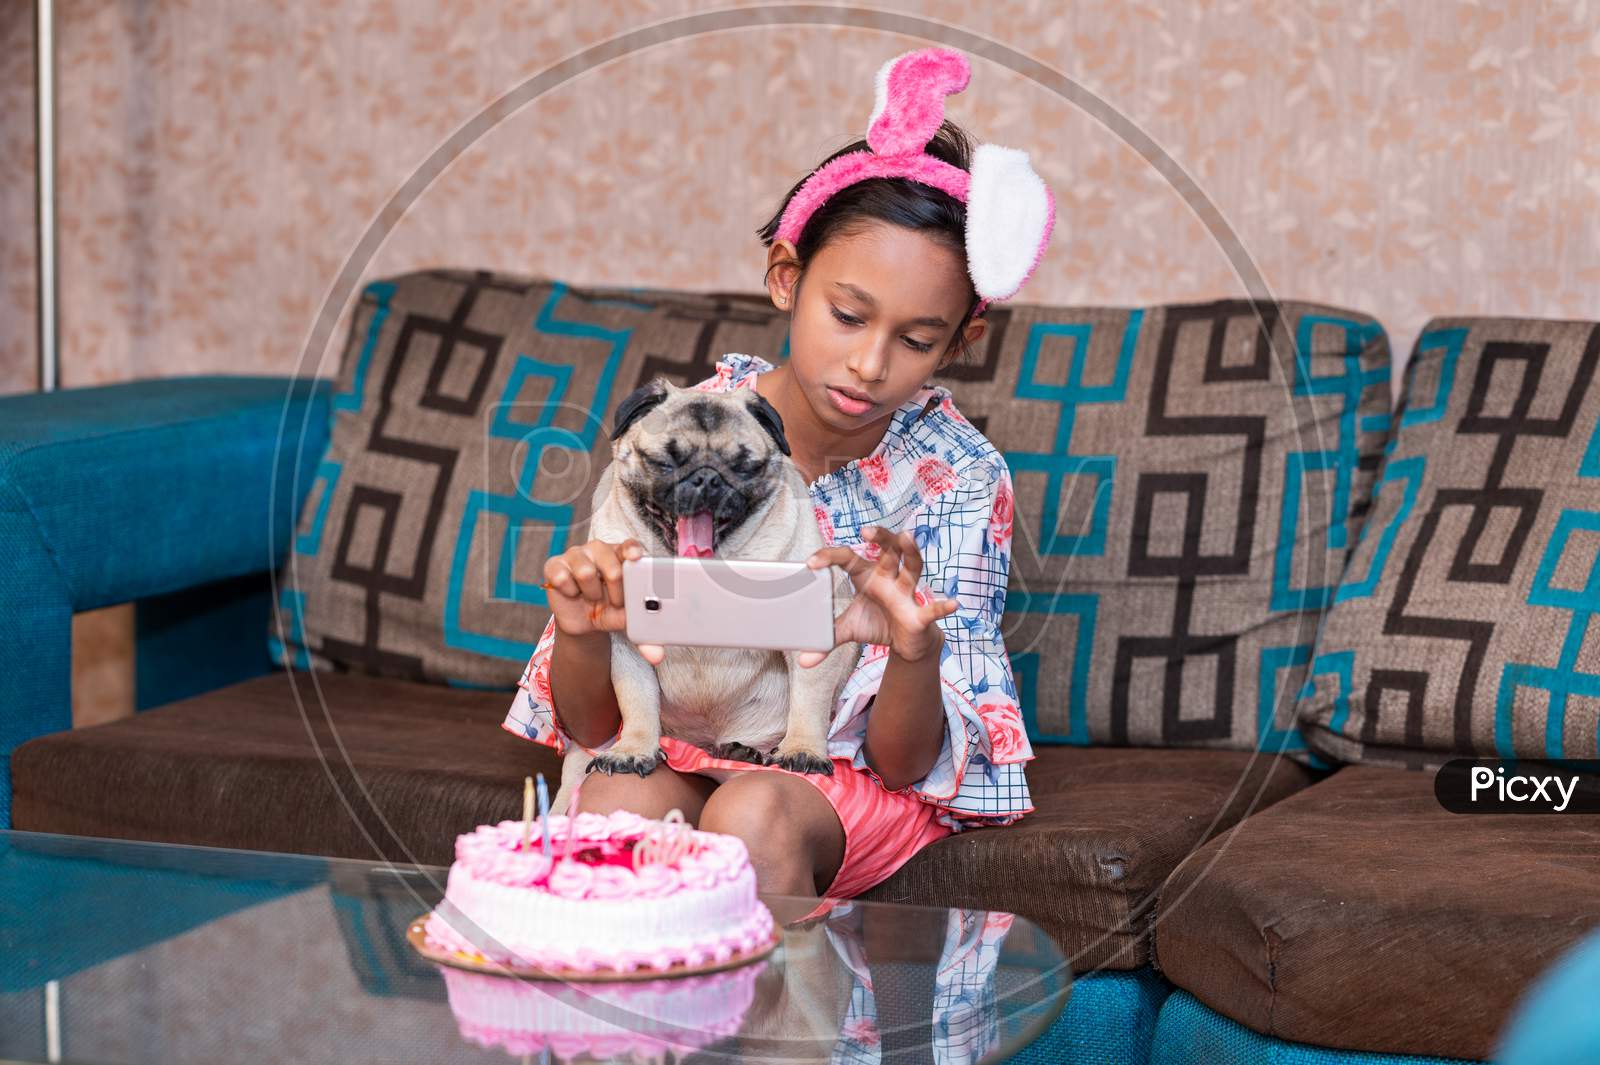 A happy beautiful girl taking photos of her birthday cake with her pet dog. Party, cake, friendship with pet animal concept.